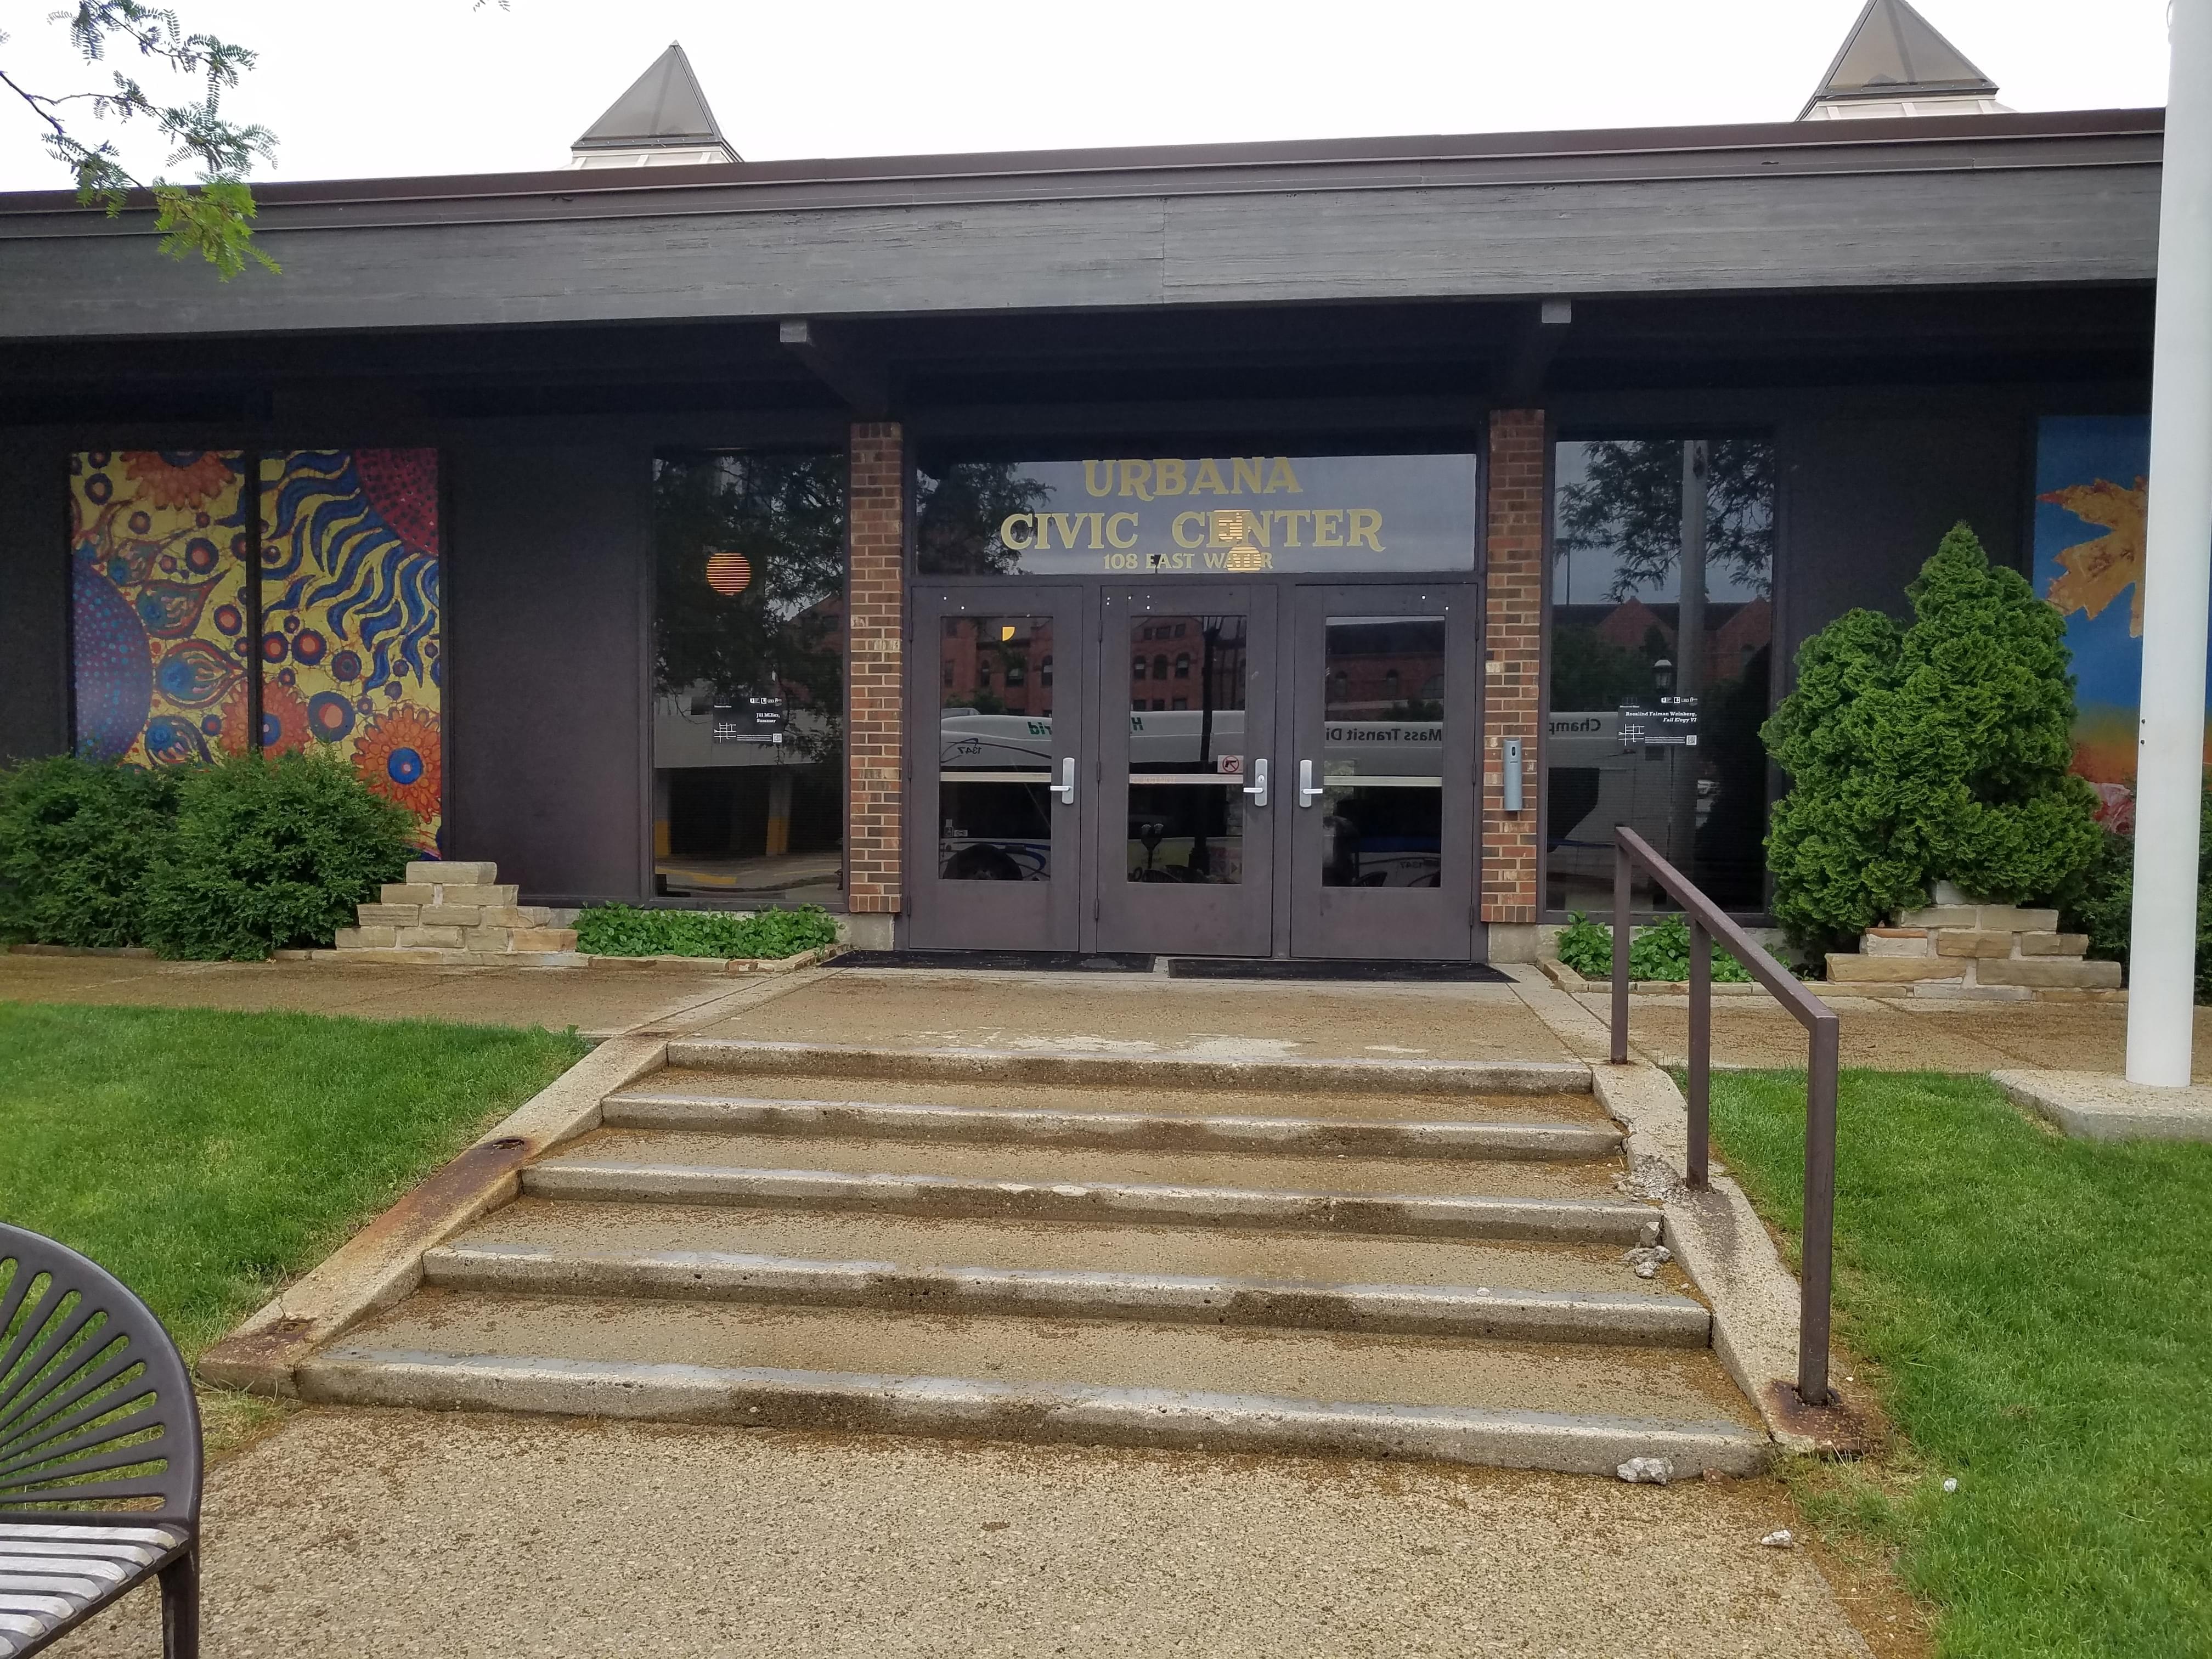 A budget proposal by Urbana Mayor Diane Marlin would cut city expenses by closing the deteriorating Urbana Civic Center.